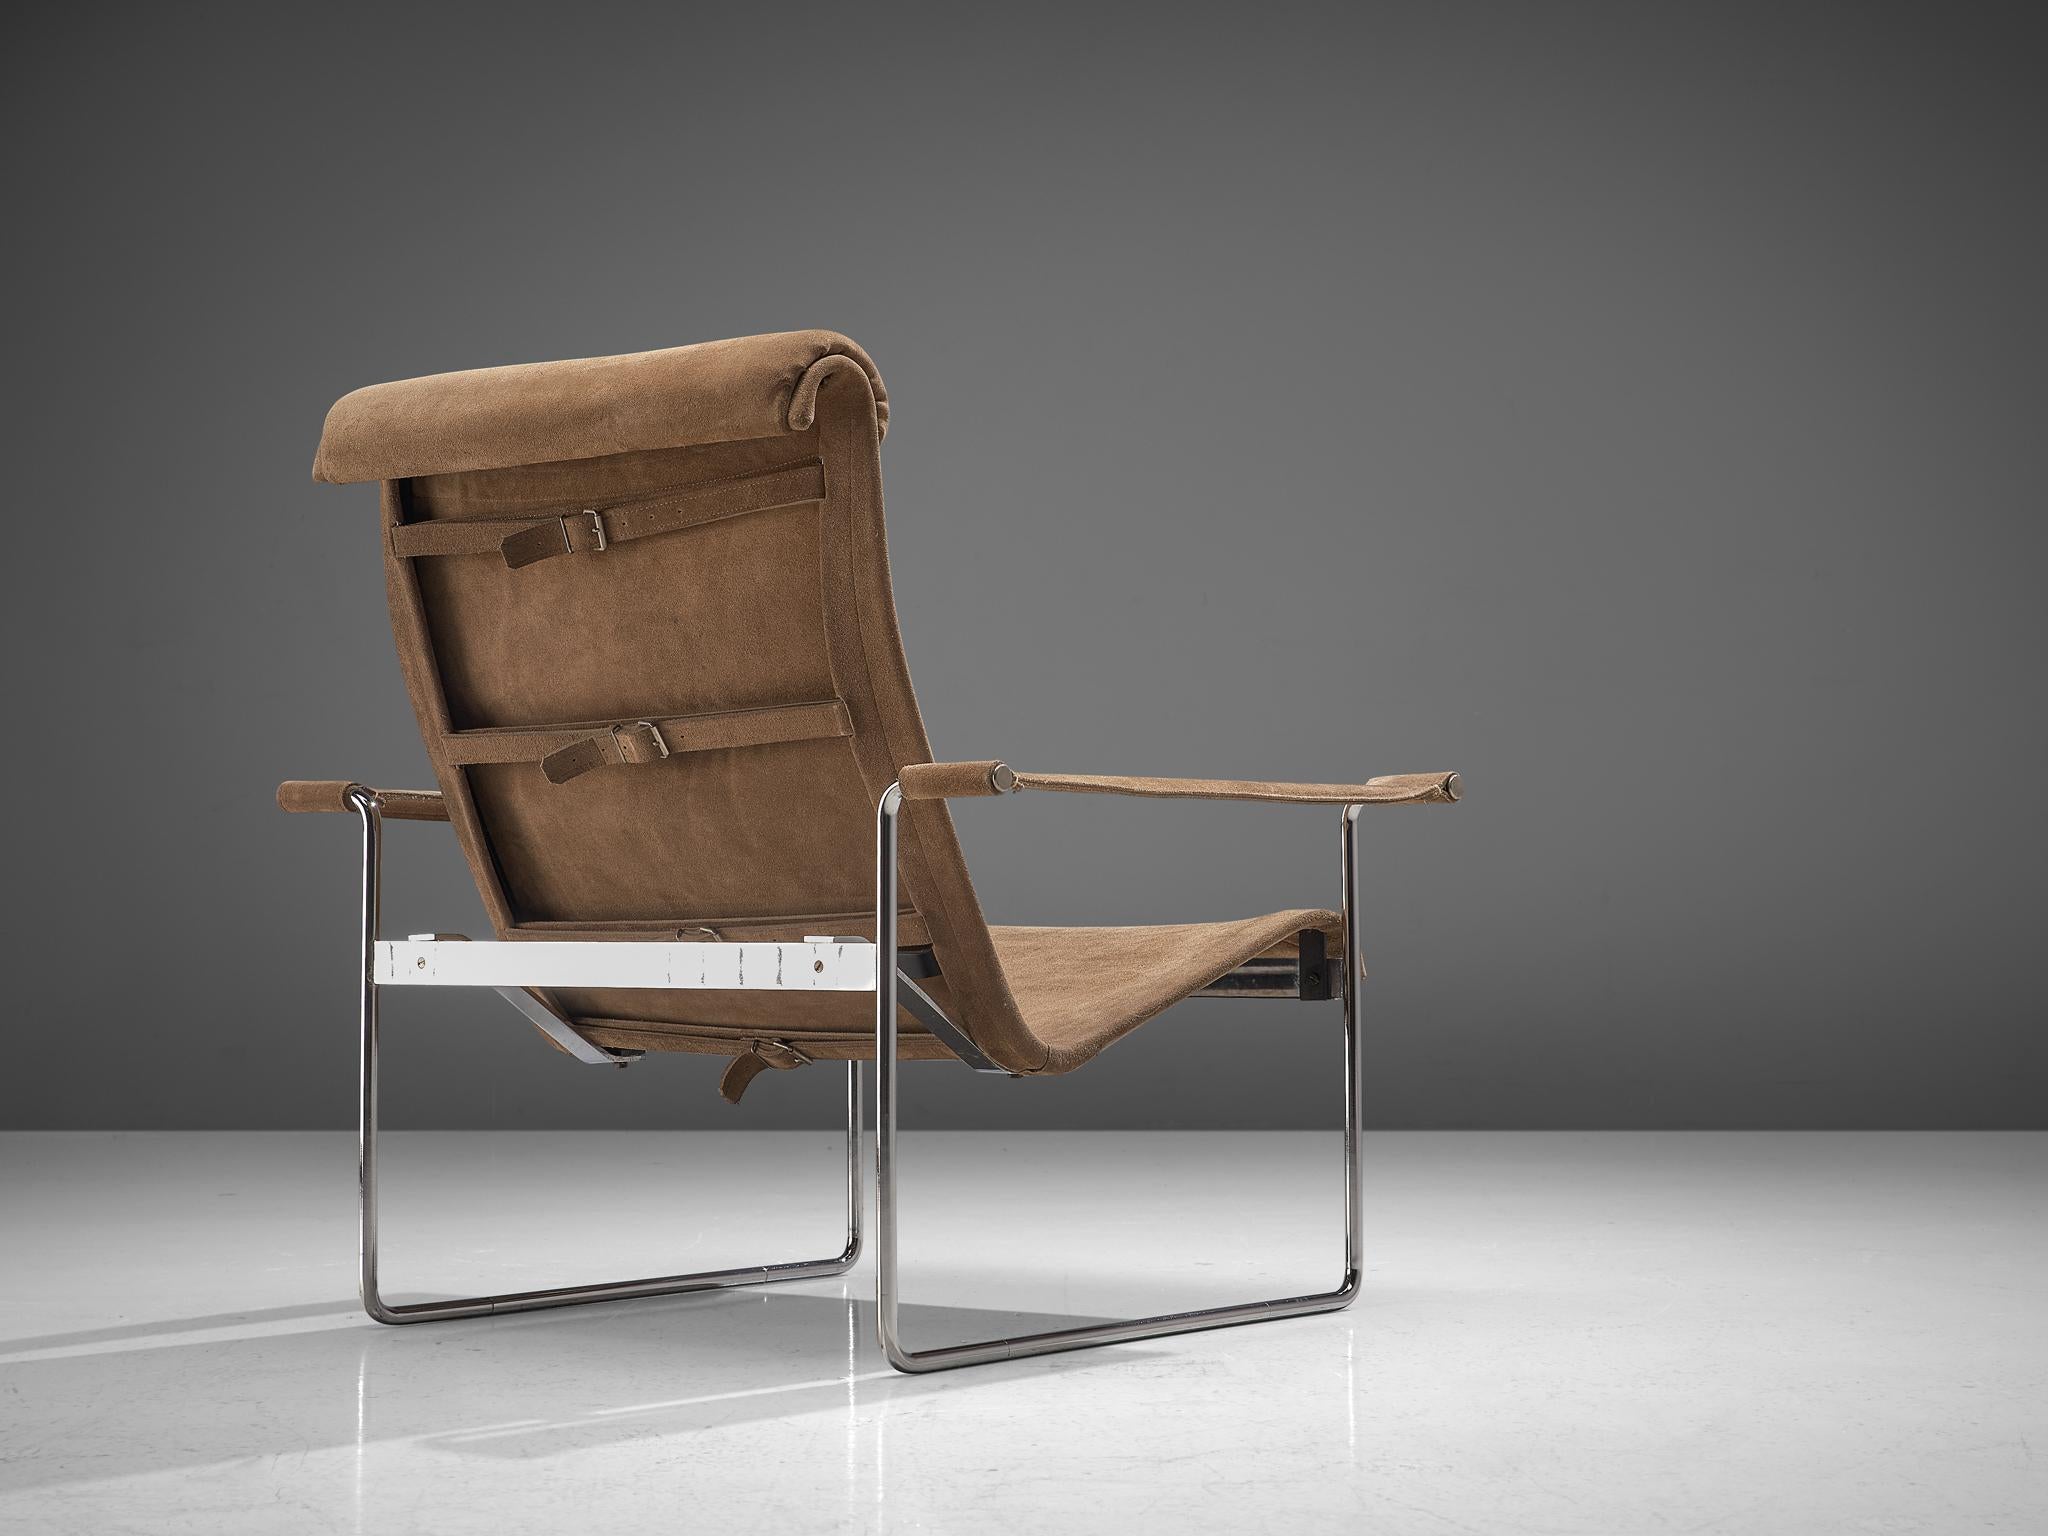 Hans Könecke for Tecta, armchair, suede and metal, Germany, 1960s

This lounge chair is another great example of German Modernist furniture, designed by architect Hans Könecke in the 1960s. This model features a high back, in comparison to Könecke's